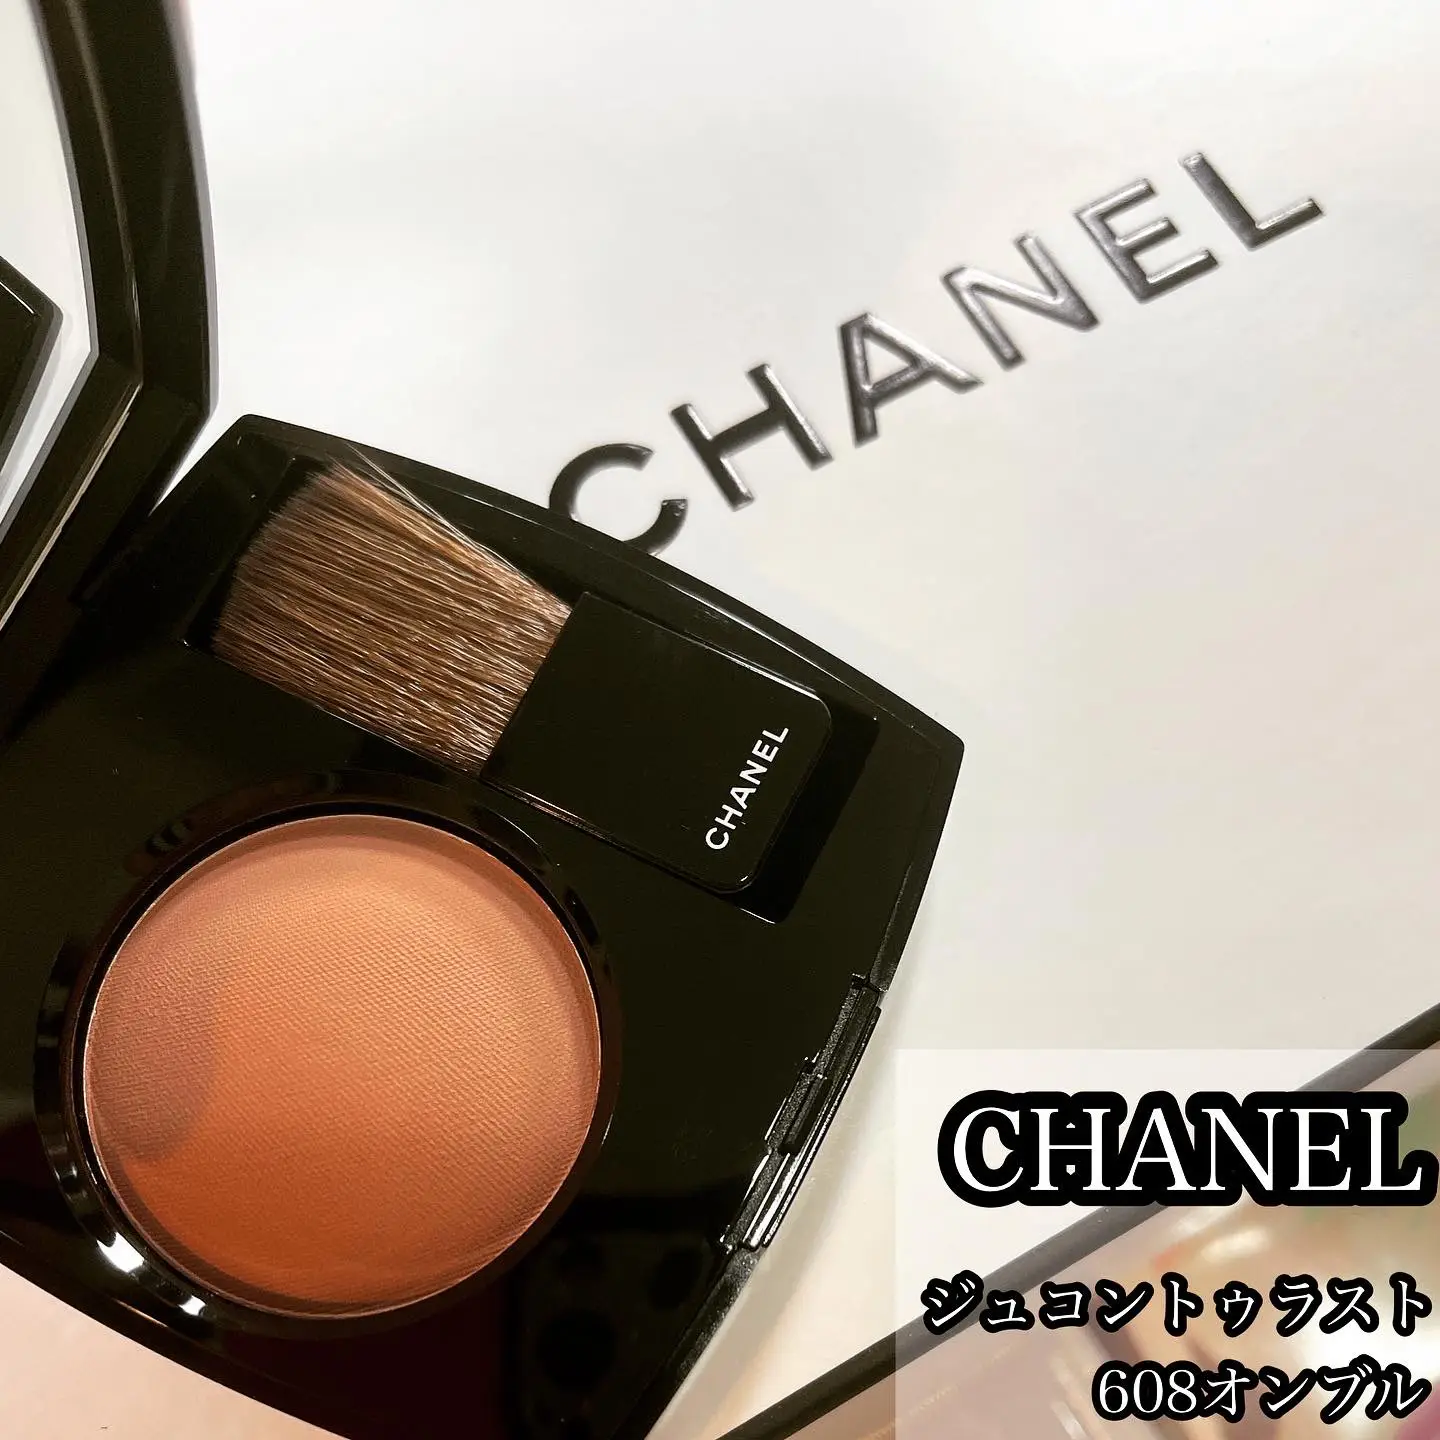 CHANEL ブラウンチーク | Gallery posted by chamaru222 | Lemon8